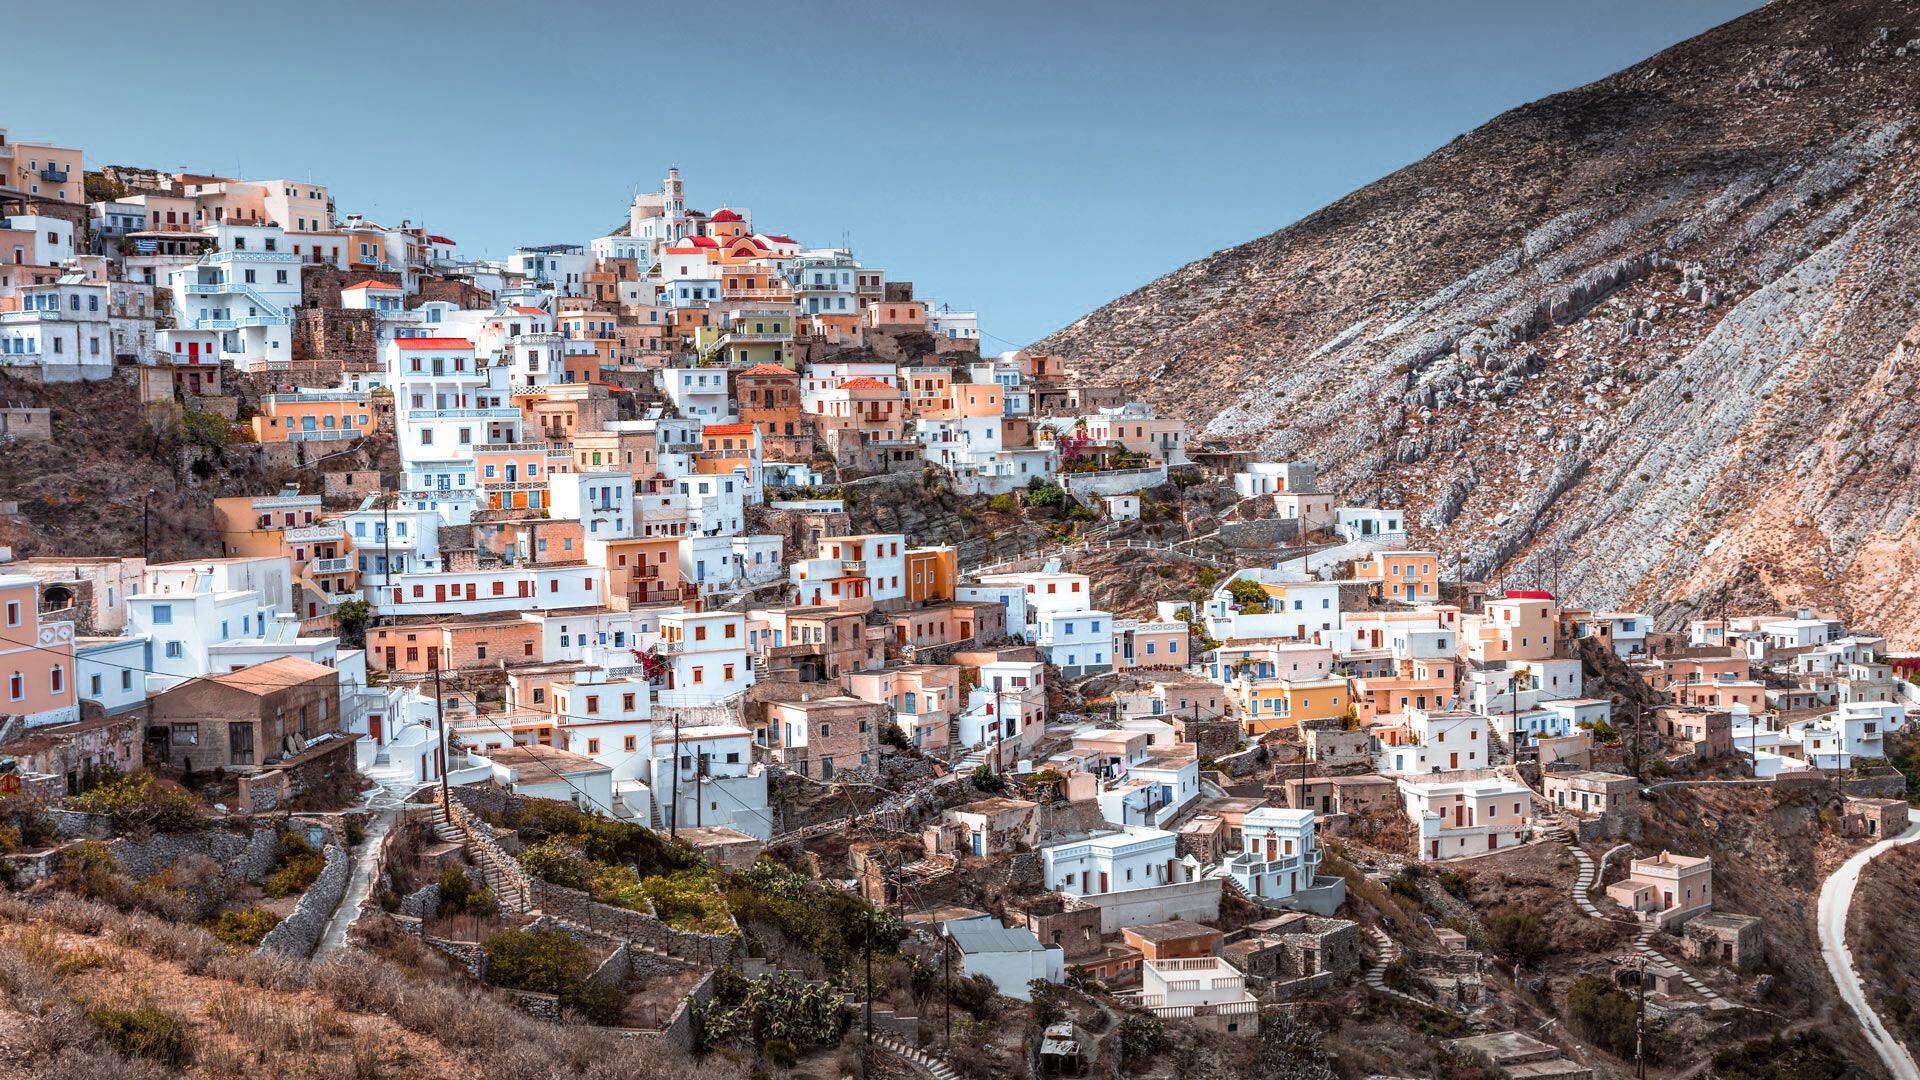 The most famous village in Karpathos island, with panoramic views